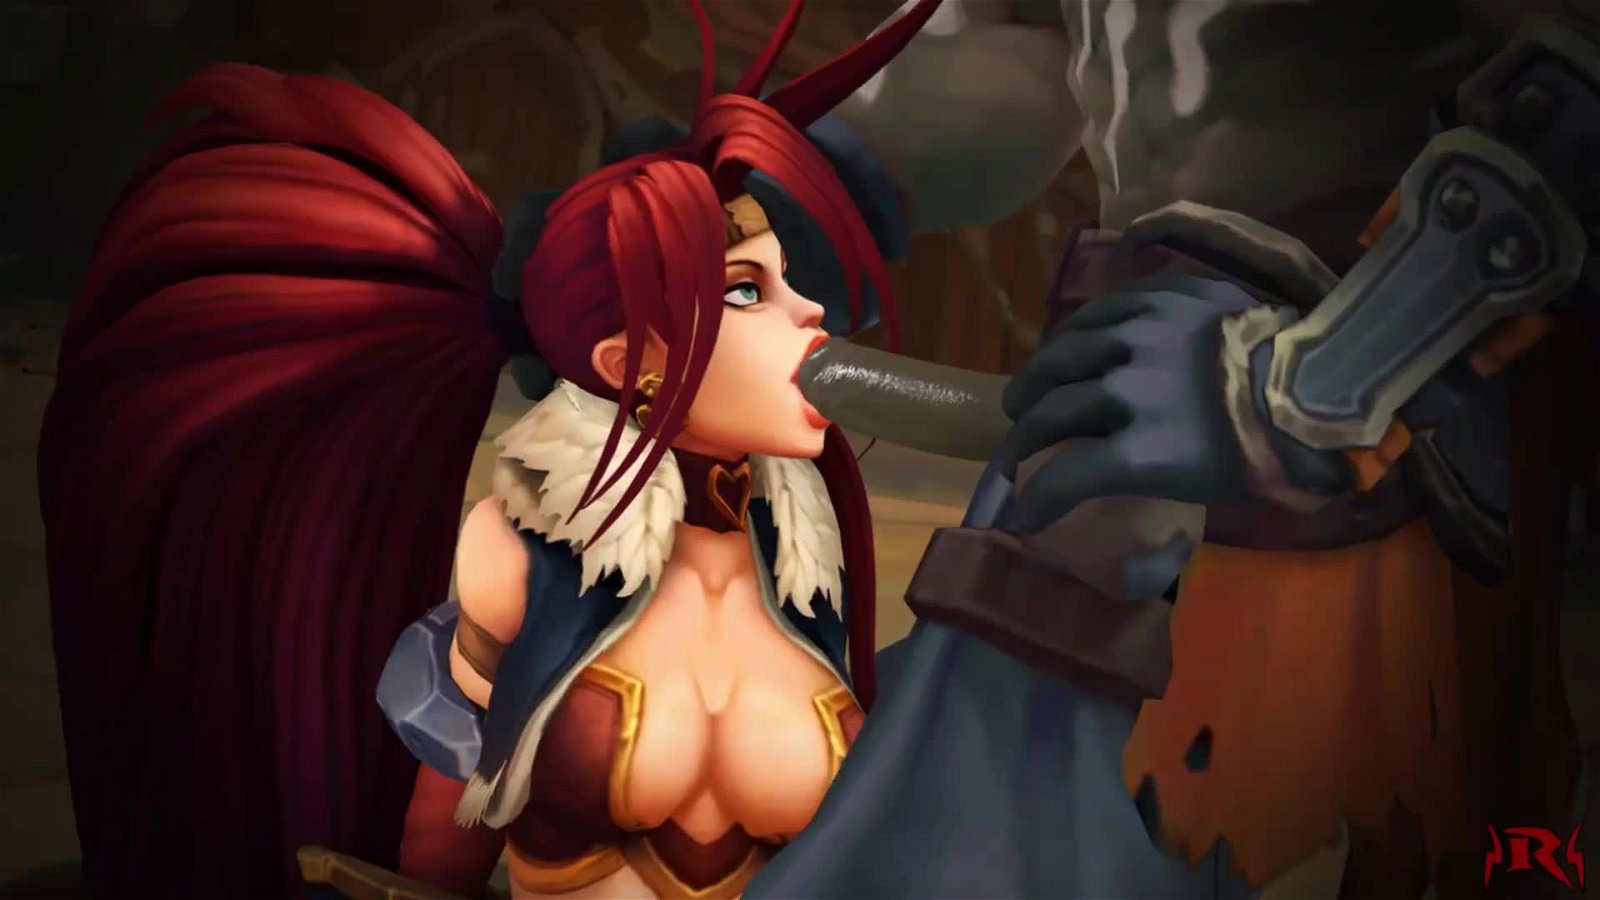 Video by Rexx with the username @rexxworld, who is a verified user,  July 31, 2021 at 5:54 PM. The post is about the topic 3D Animation Gaming and the text says '[SOUND] (Battle Chasers) The Arena
#3D #BattleChasers #RedMonika #Blowjob
Like what I do? Funding links in my profile, or just send some Flame'